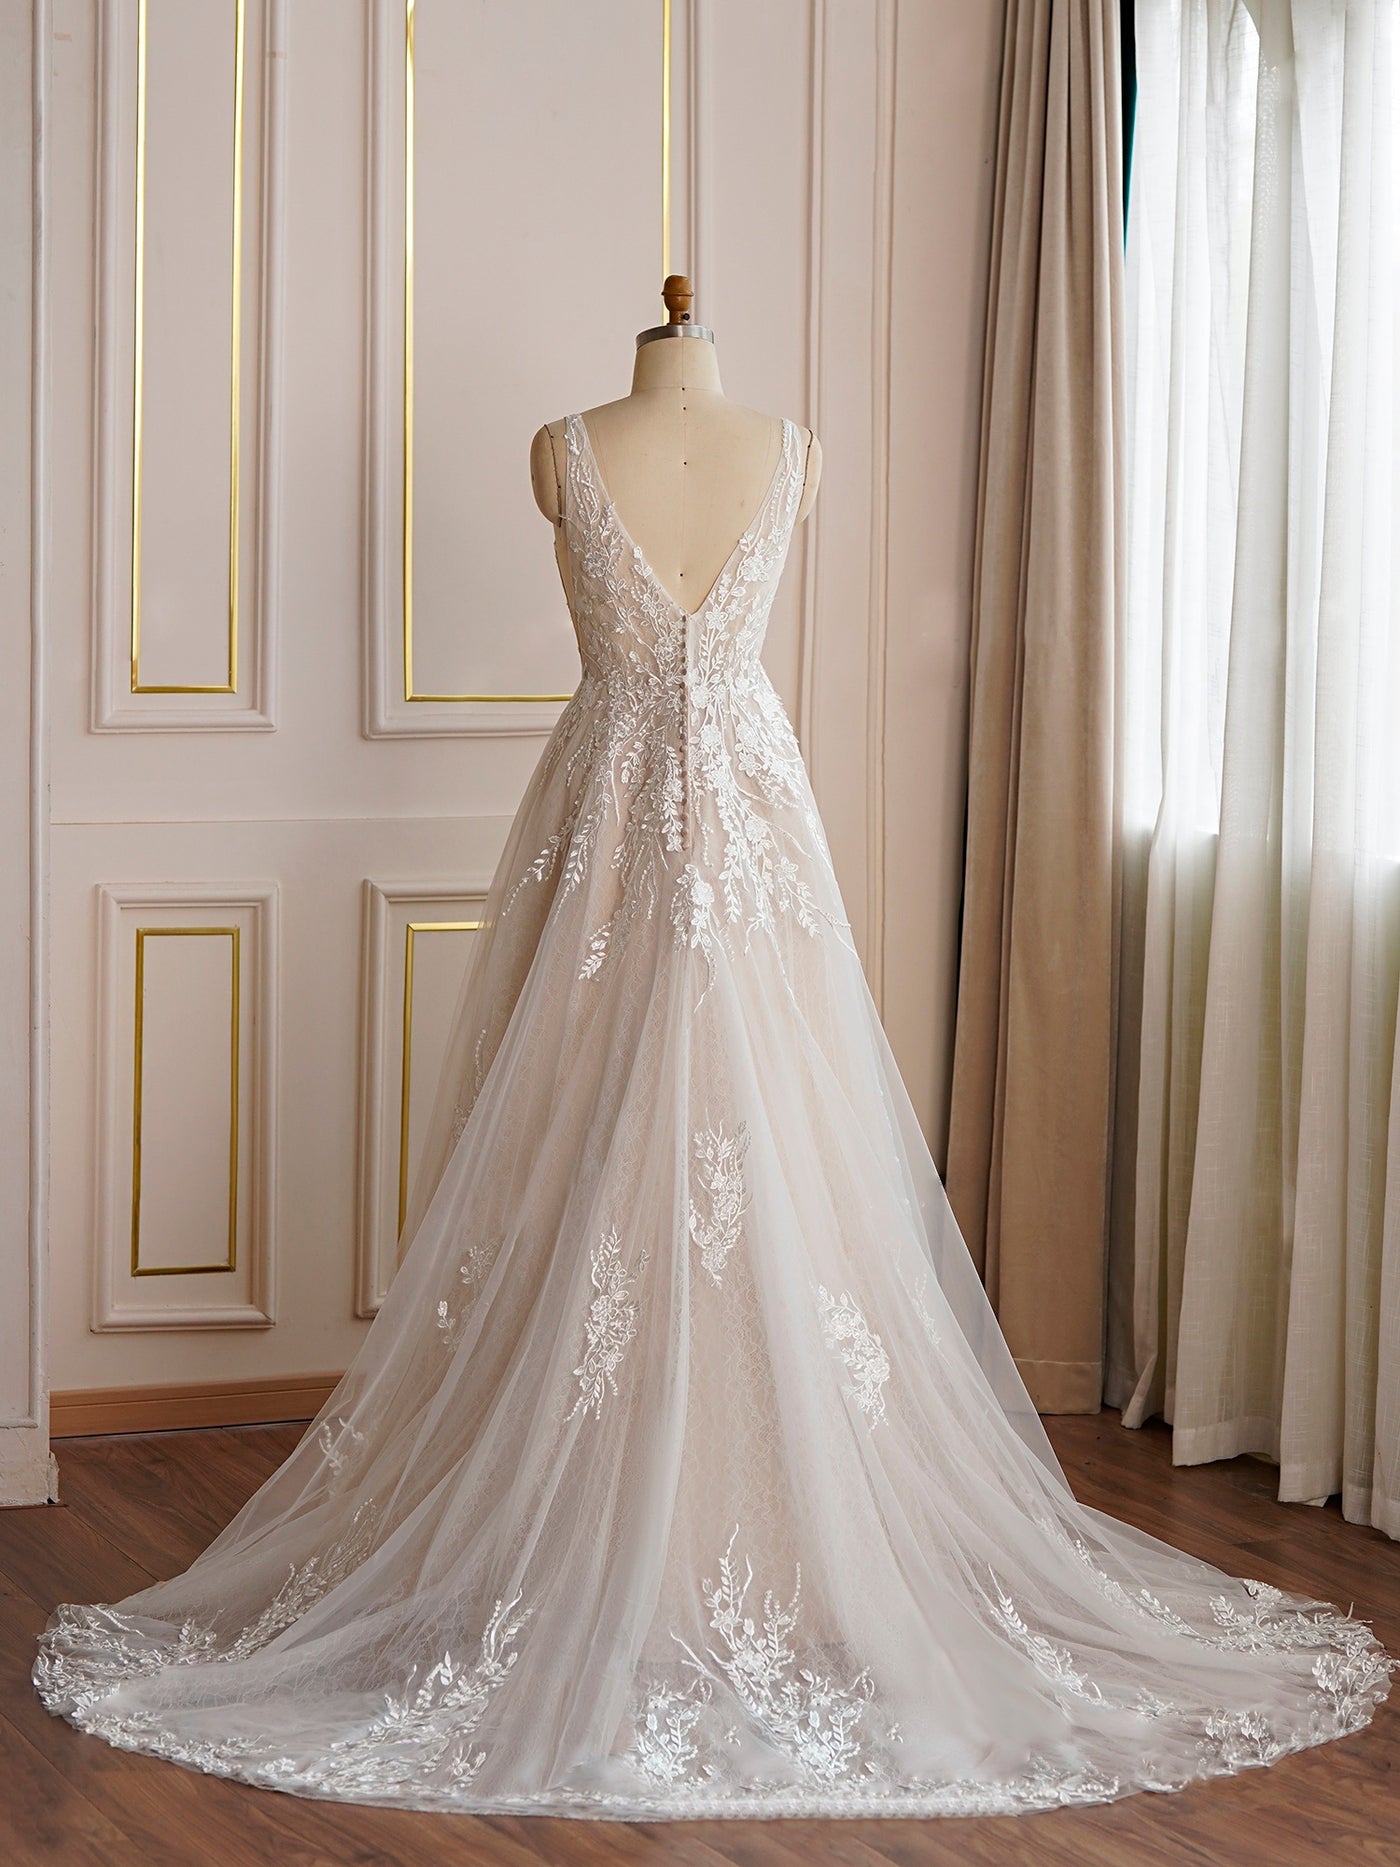 A V-neckline Floral Lace A-line Wedding Dress - Off The Rack by Bergamot Bridal in a bridal shop in London.